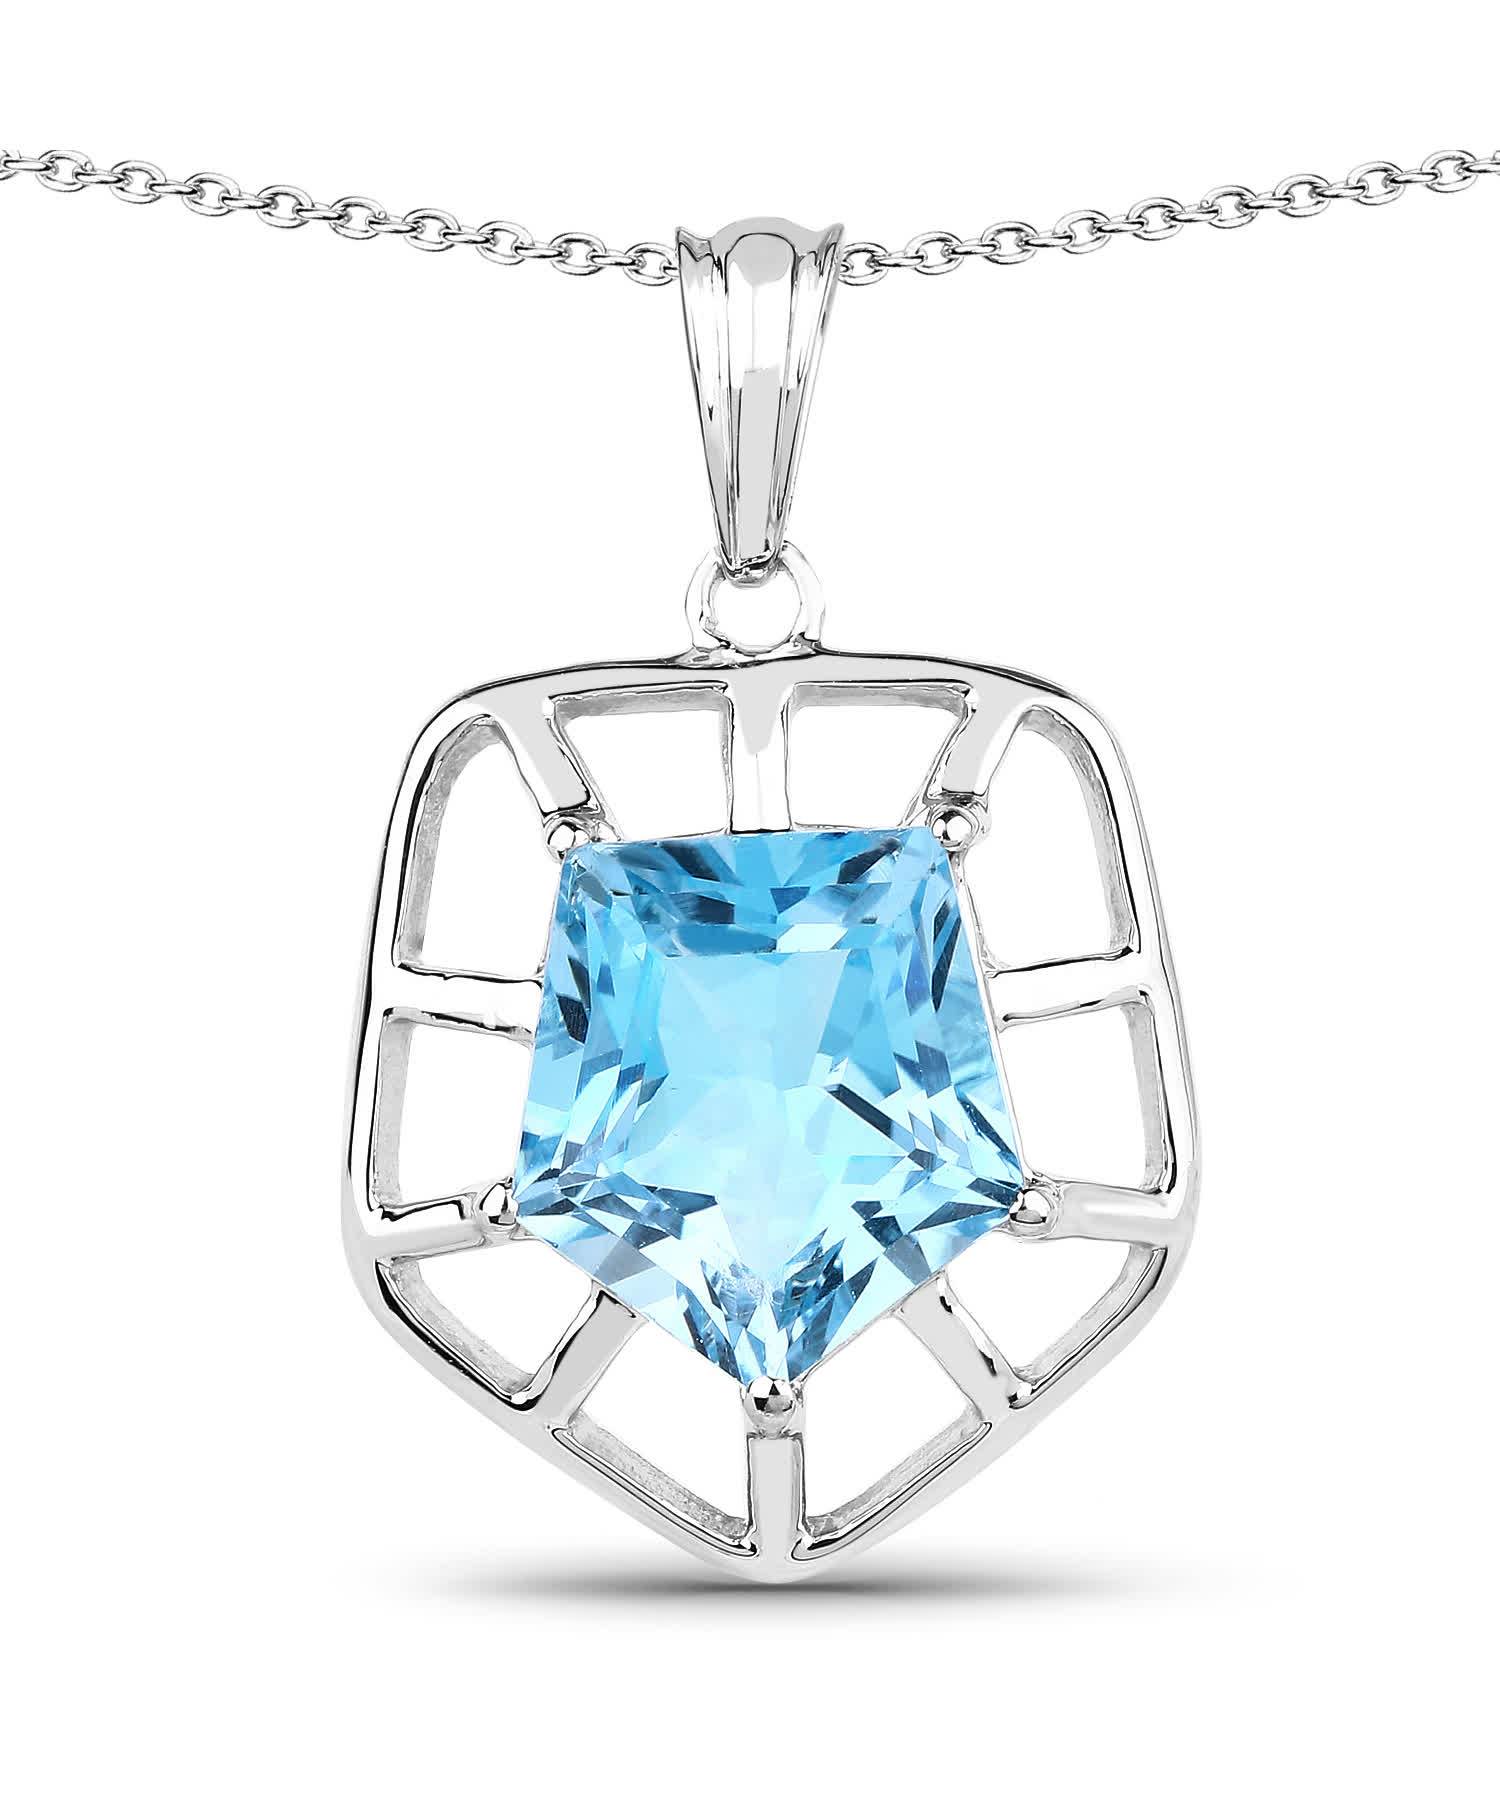 7.60ctw Natural Swiss Blue Topaz Rhodium Plated 925 Sterling Silver Pendant With Chain View 1